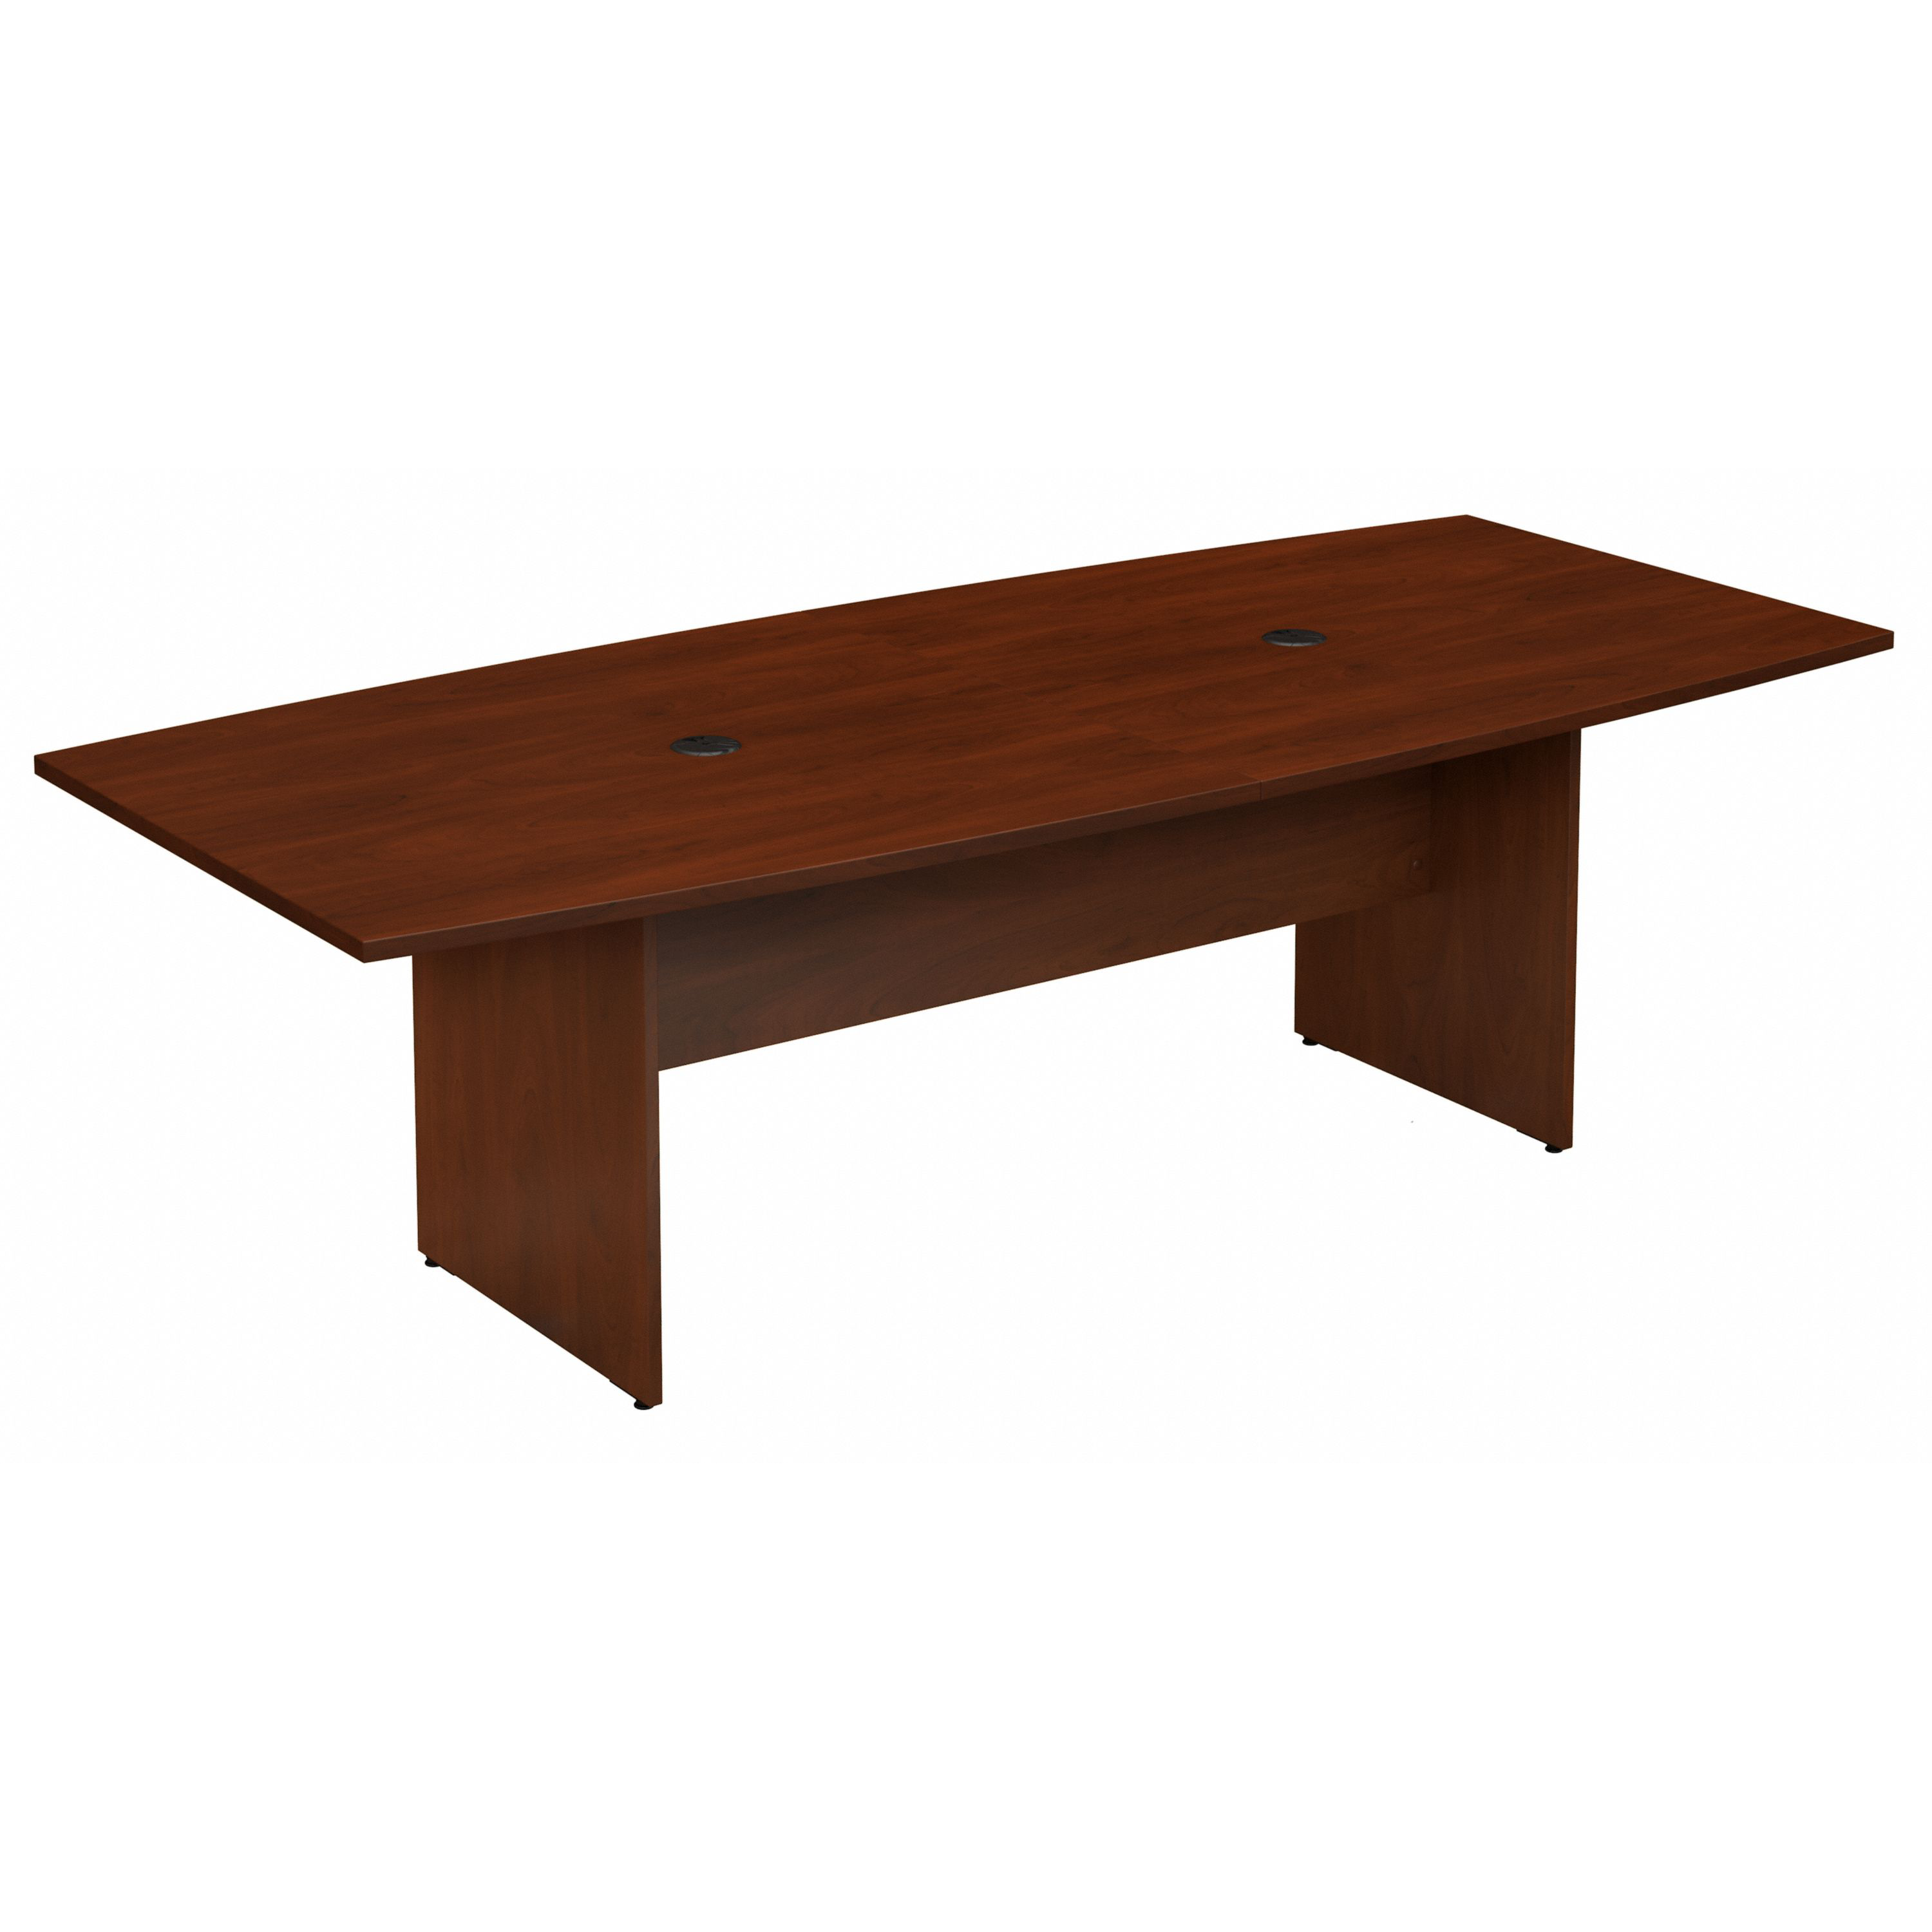 Shop Bush Business Furniture 96W x 42D Boat Shaped Conference Table with Wood Base 02 99TB9642HCK #color_hansen cherry